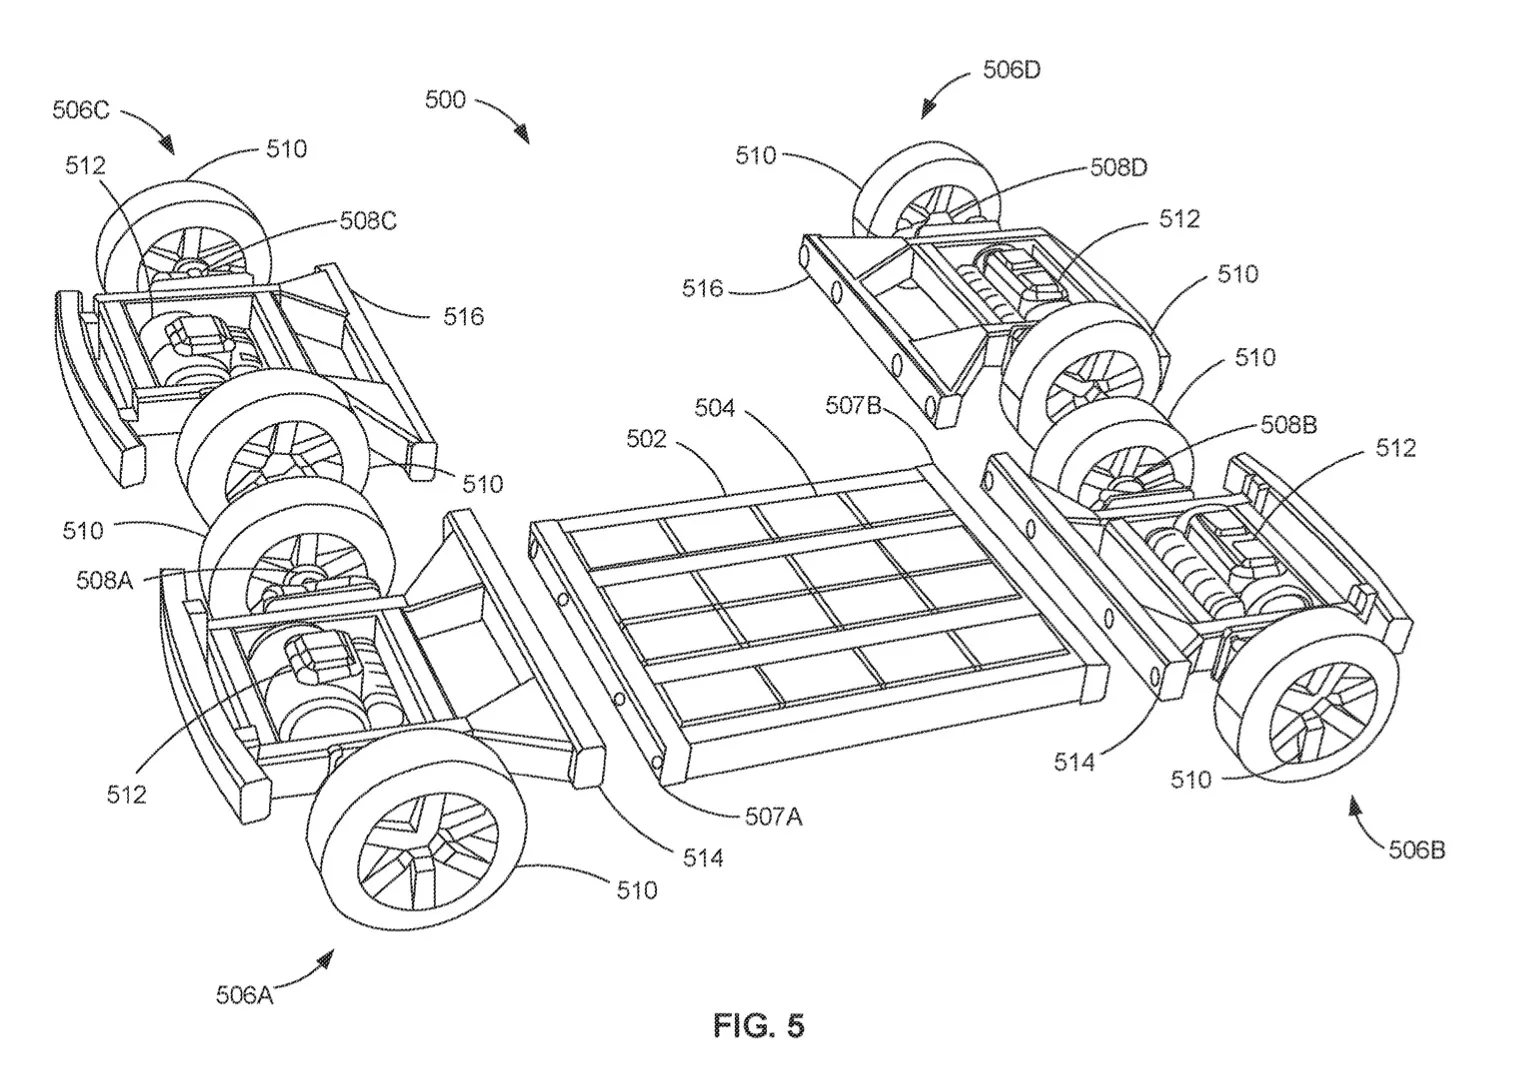 Ford patents a modular chassis designed for trucks, sports cars Auto Recent